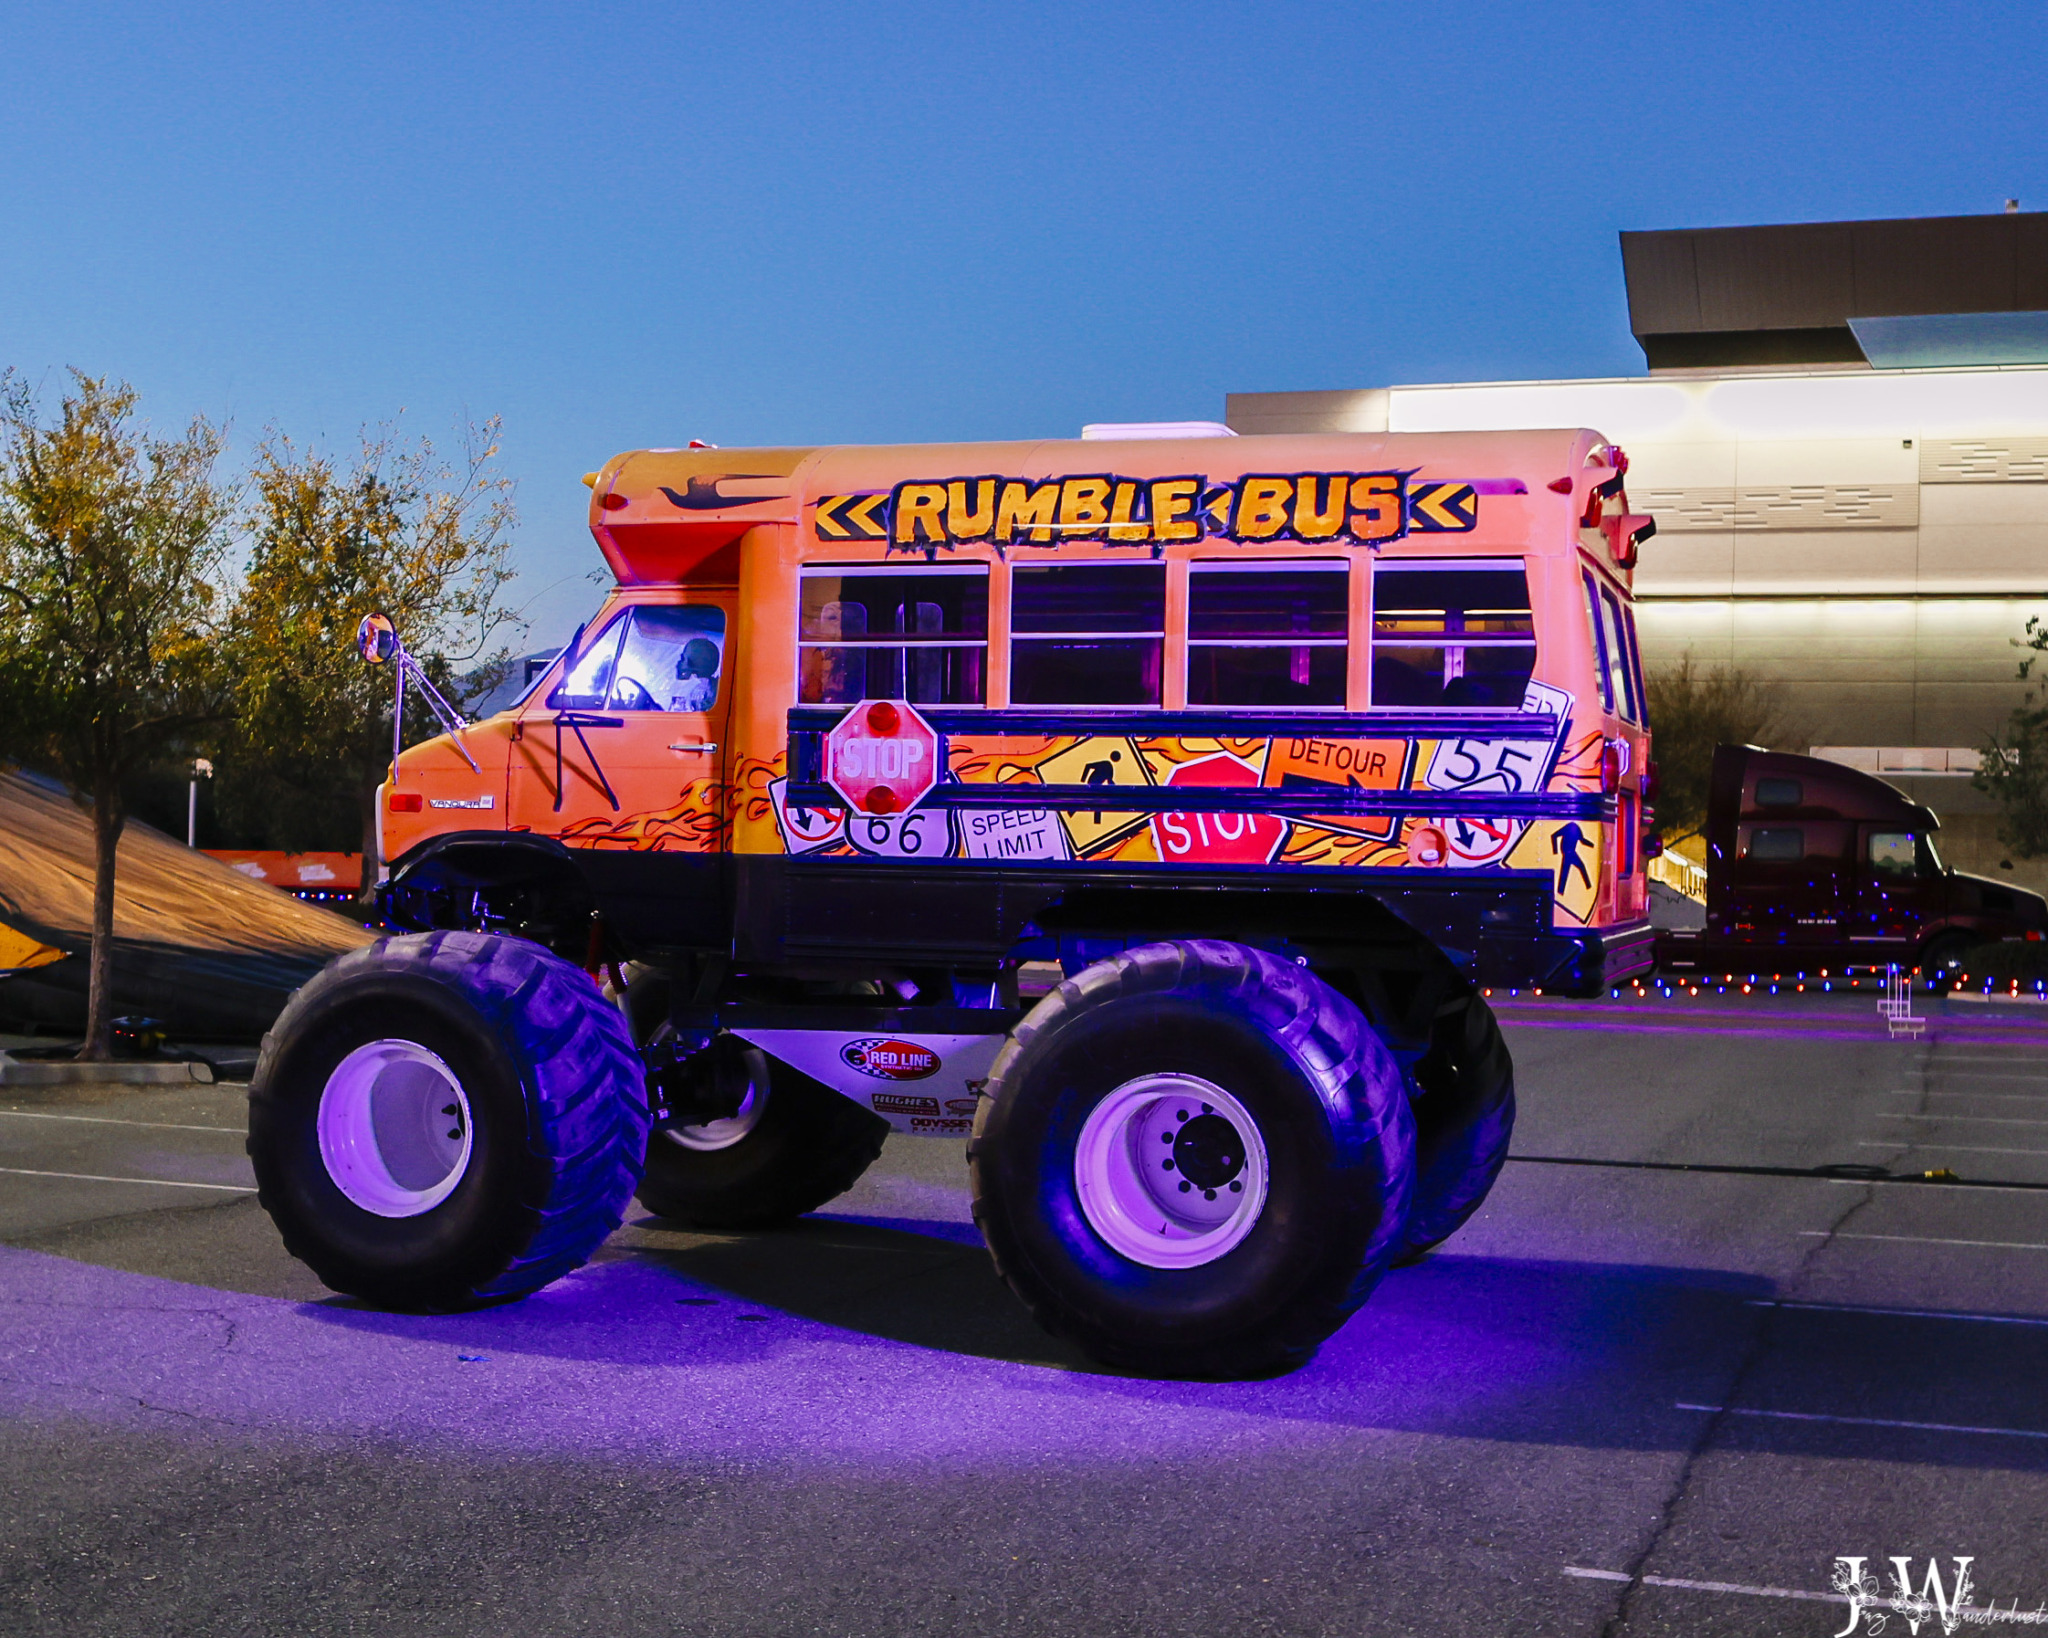 Hot Wheels rumble bus at Hot Wheels Live. Photography by Jaz Wanderlust.